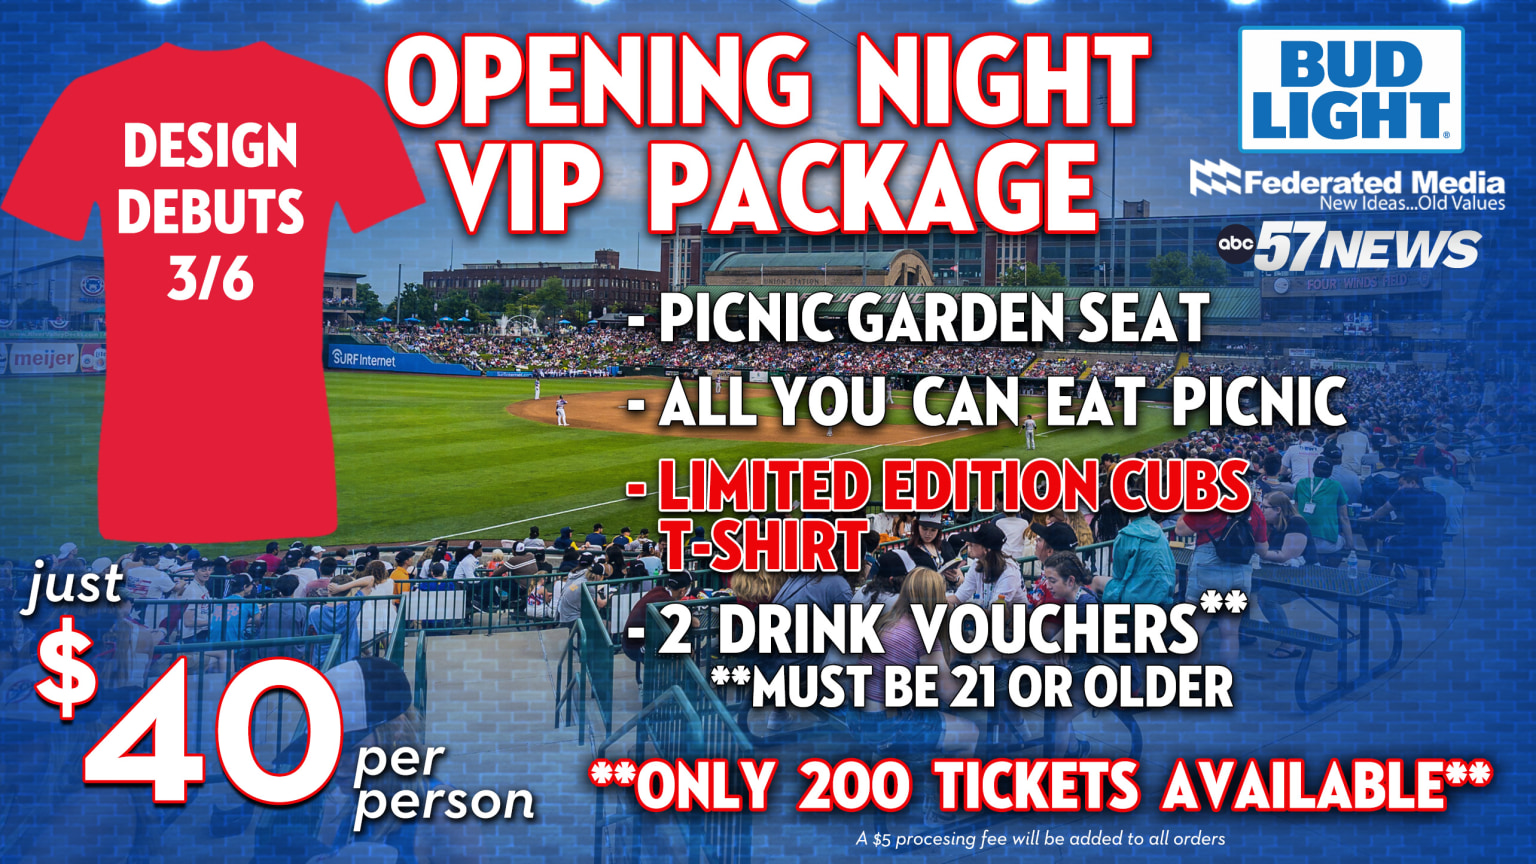 Opening Night VIP Ticket Package on Sale March 6